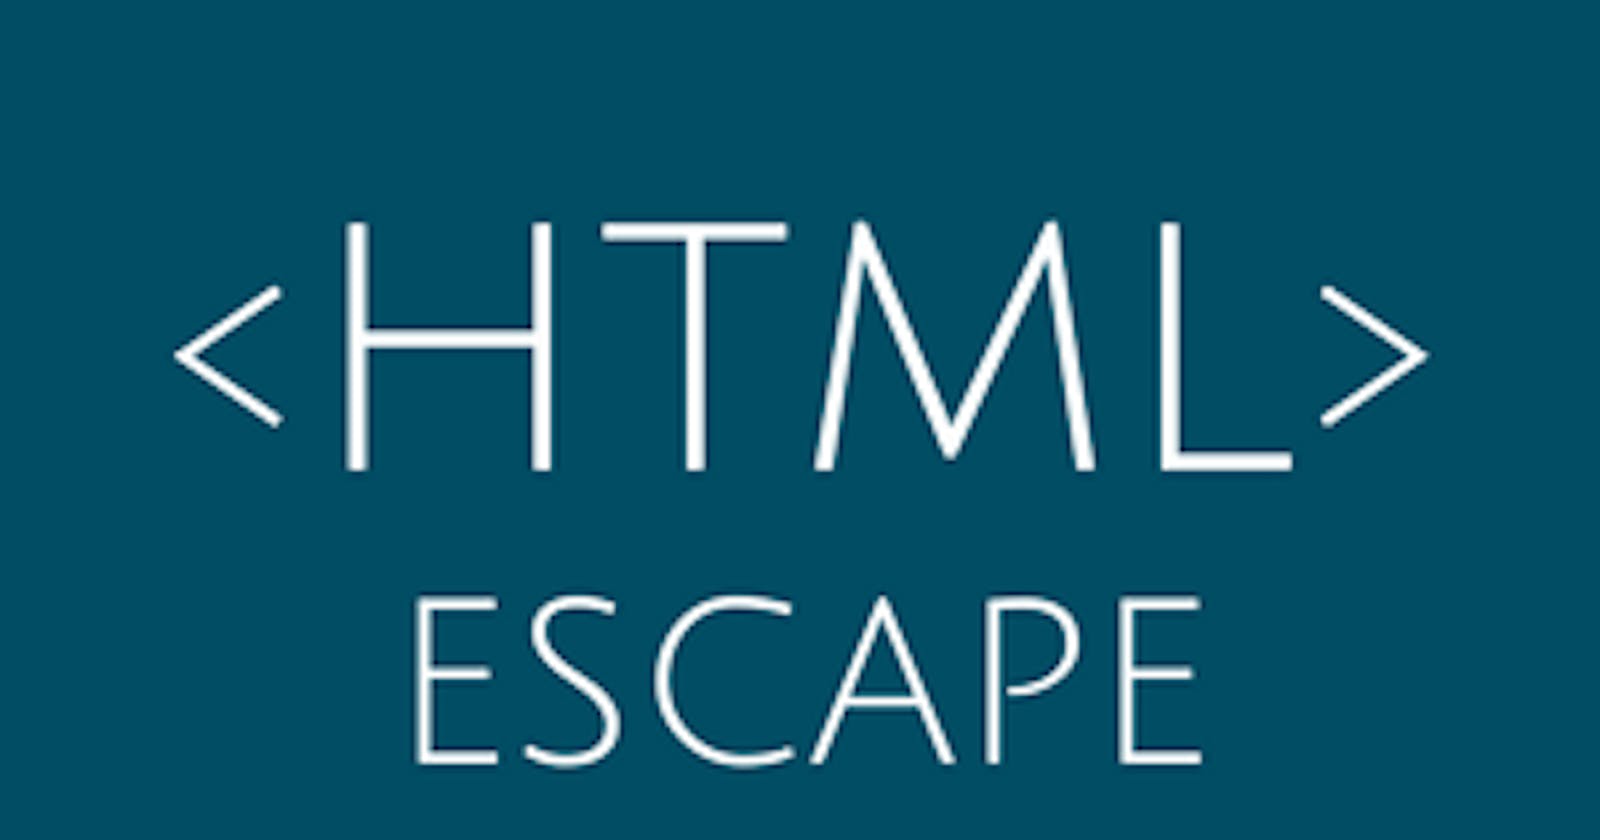 How to Do a Code HTML escape character via HTML Codes